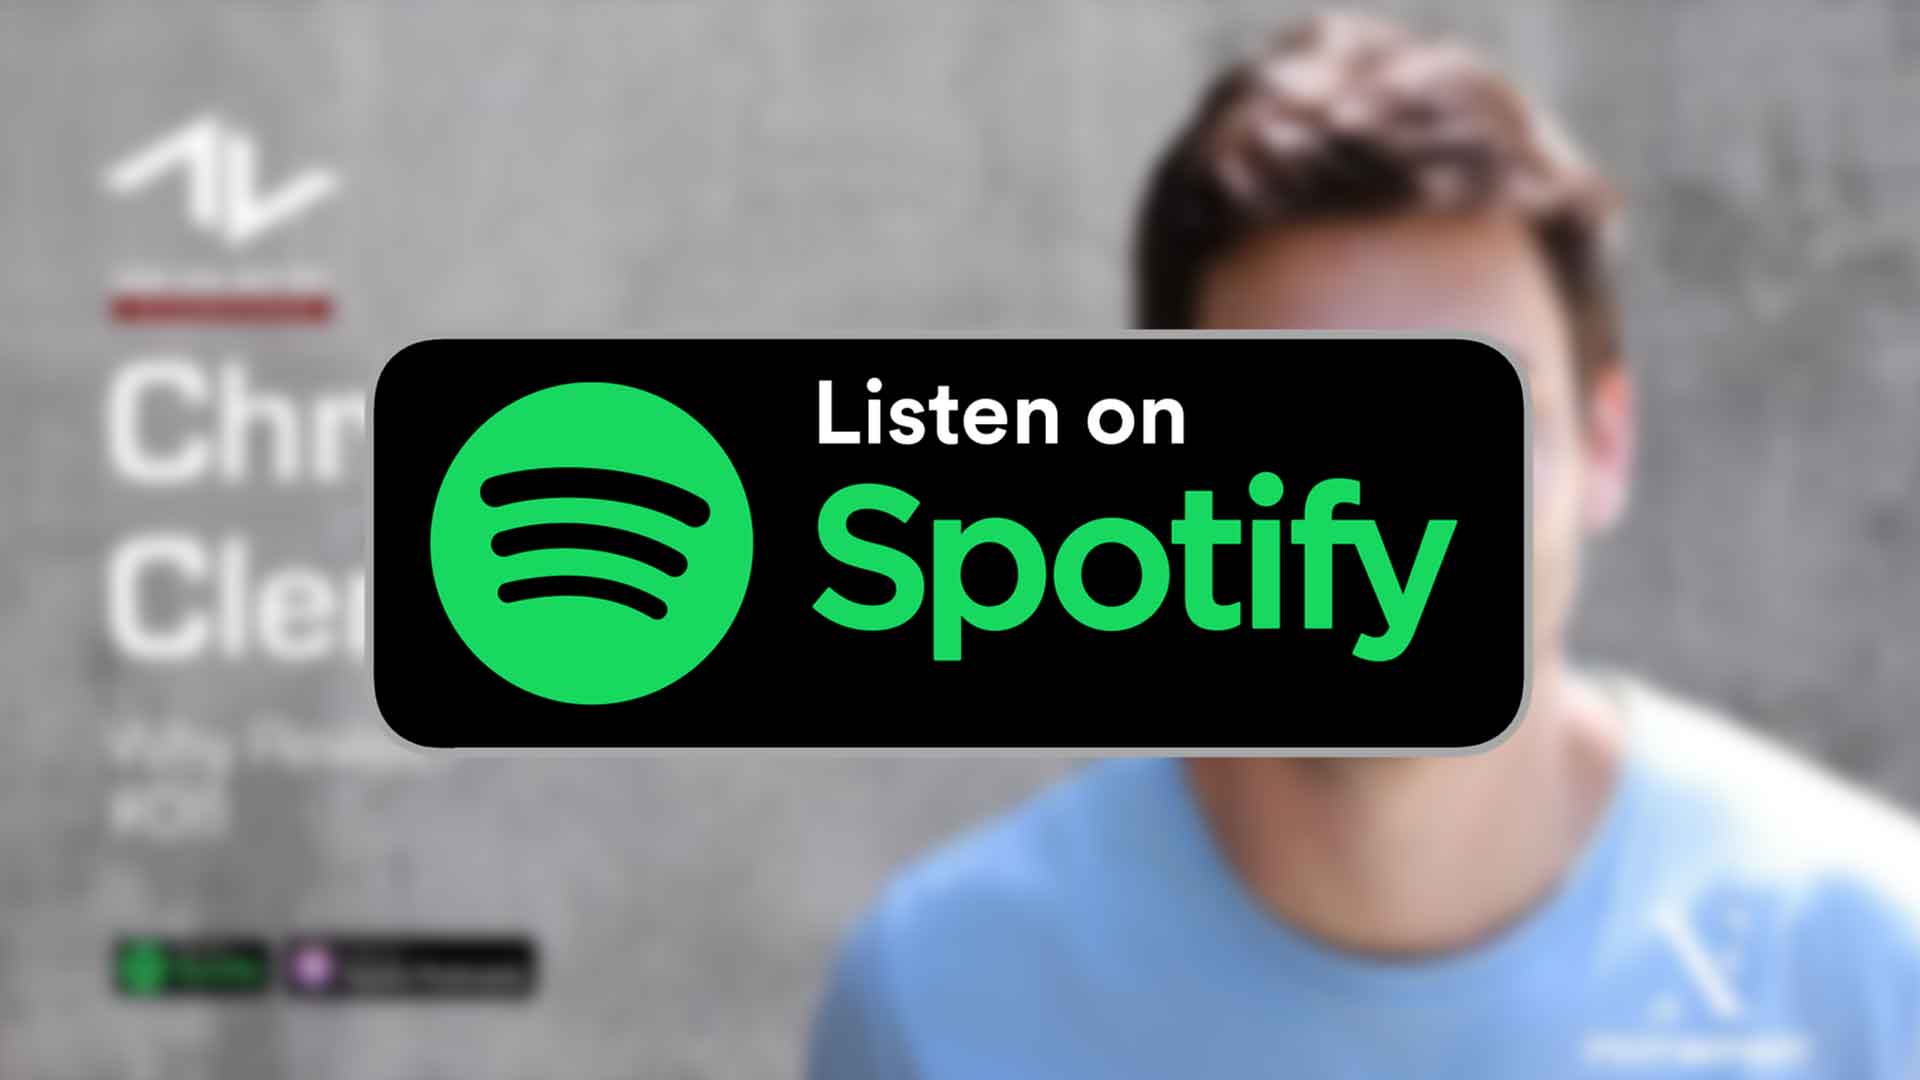 Listen to episode 8 of Ask An Artist on Spotify.